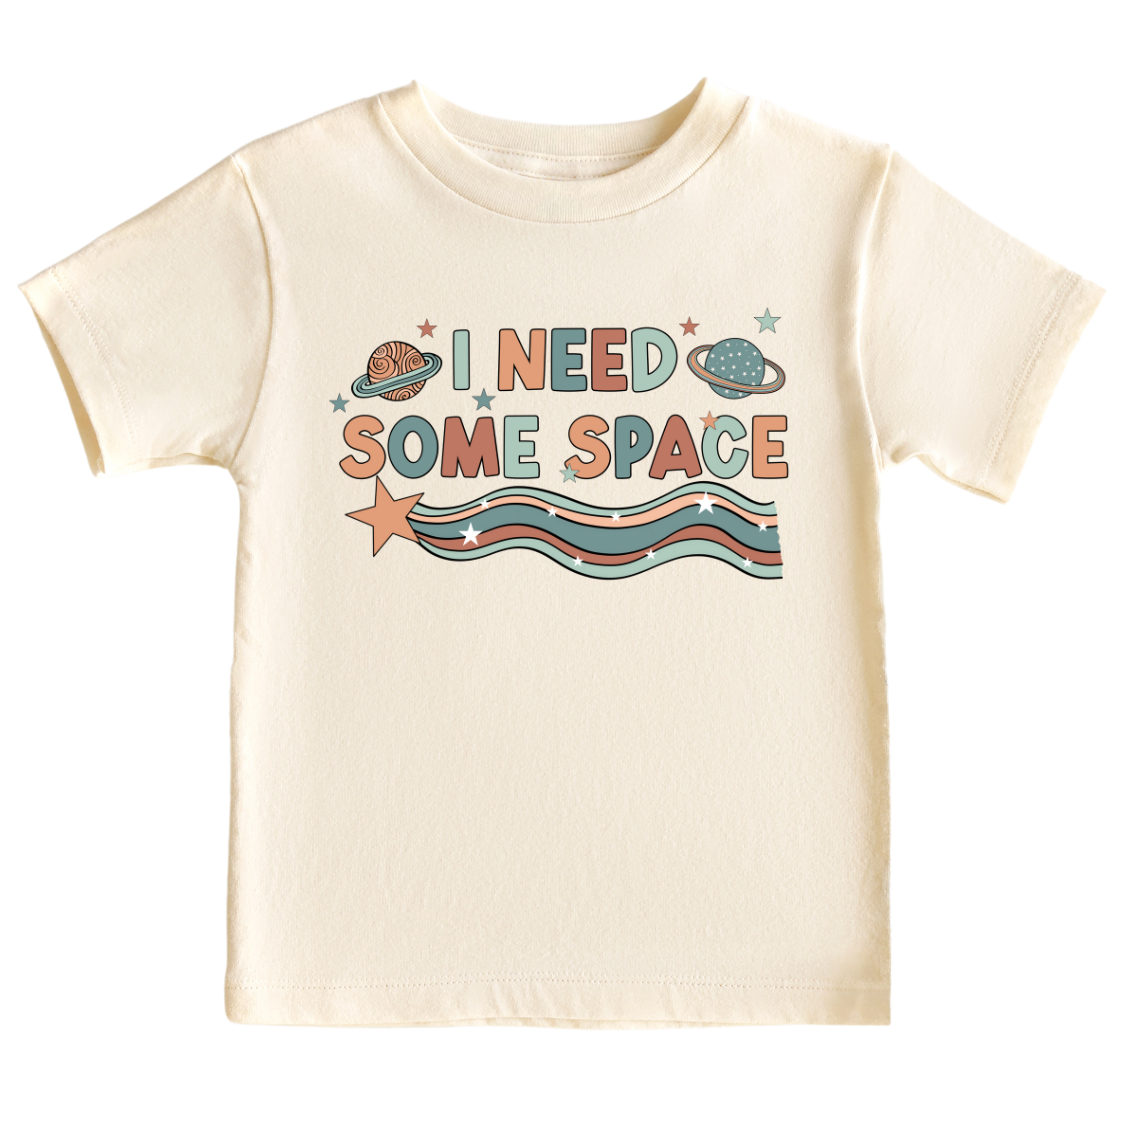 Natural Kids t-shirt with cute space graphic and the text 'I Need Some Space.' Perfect for space enthusiasts and young explorers.